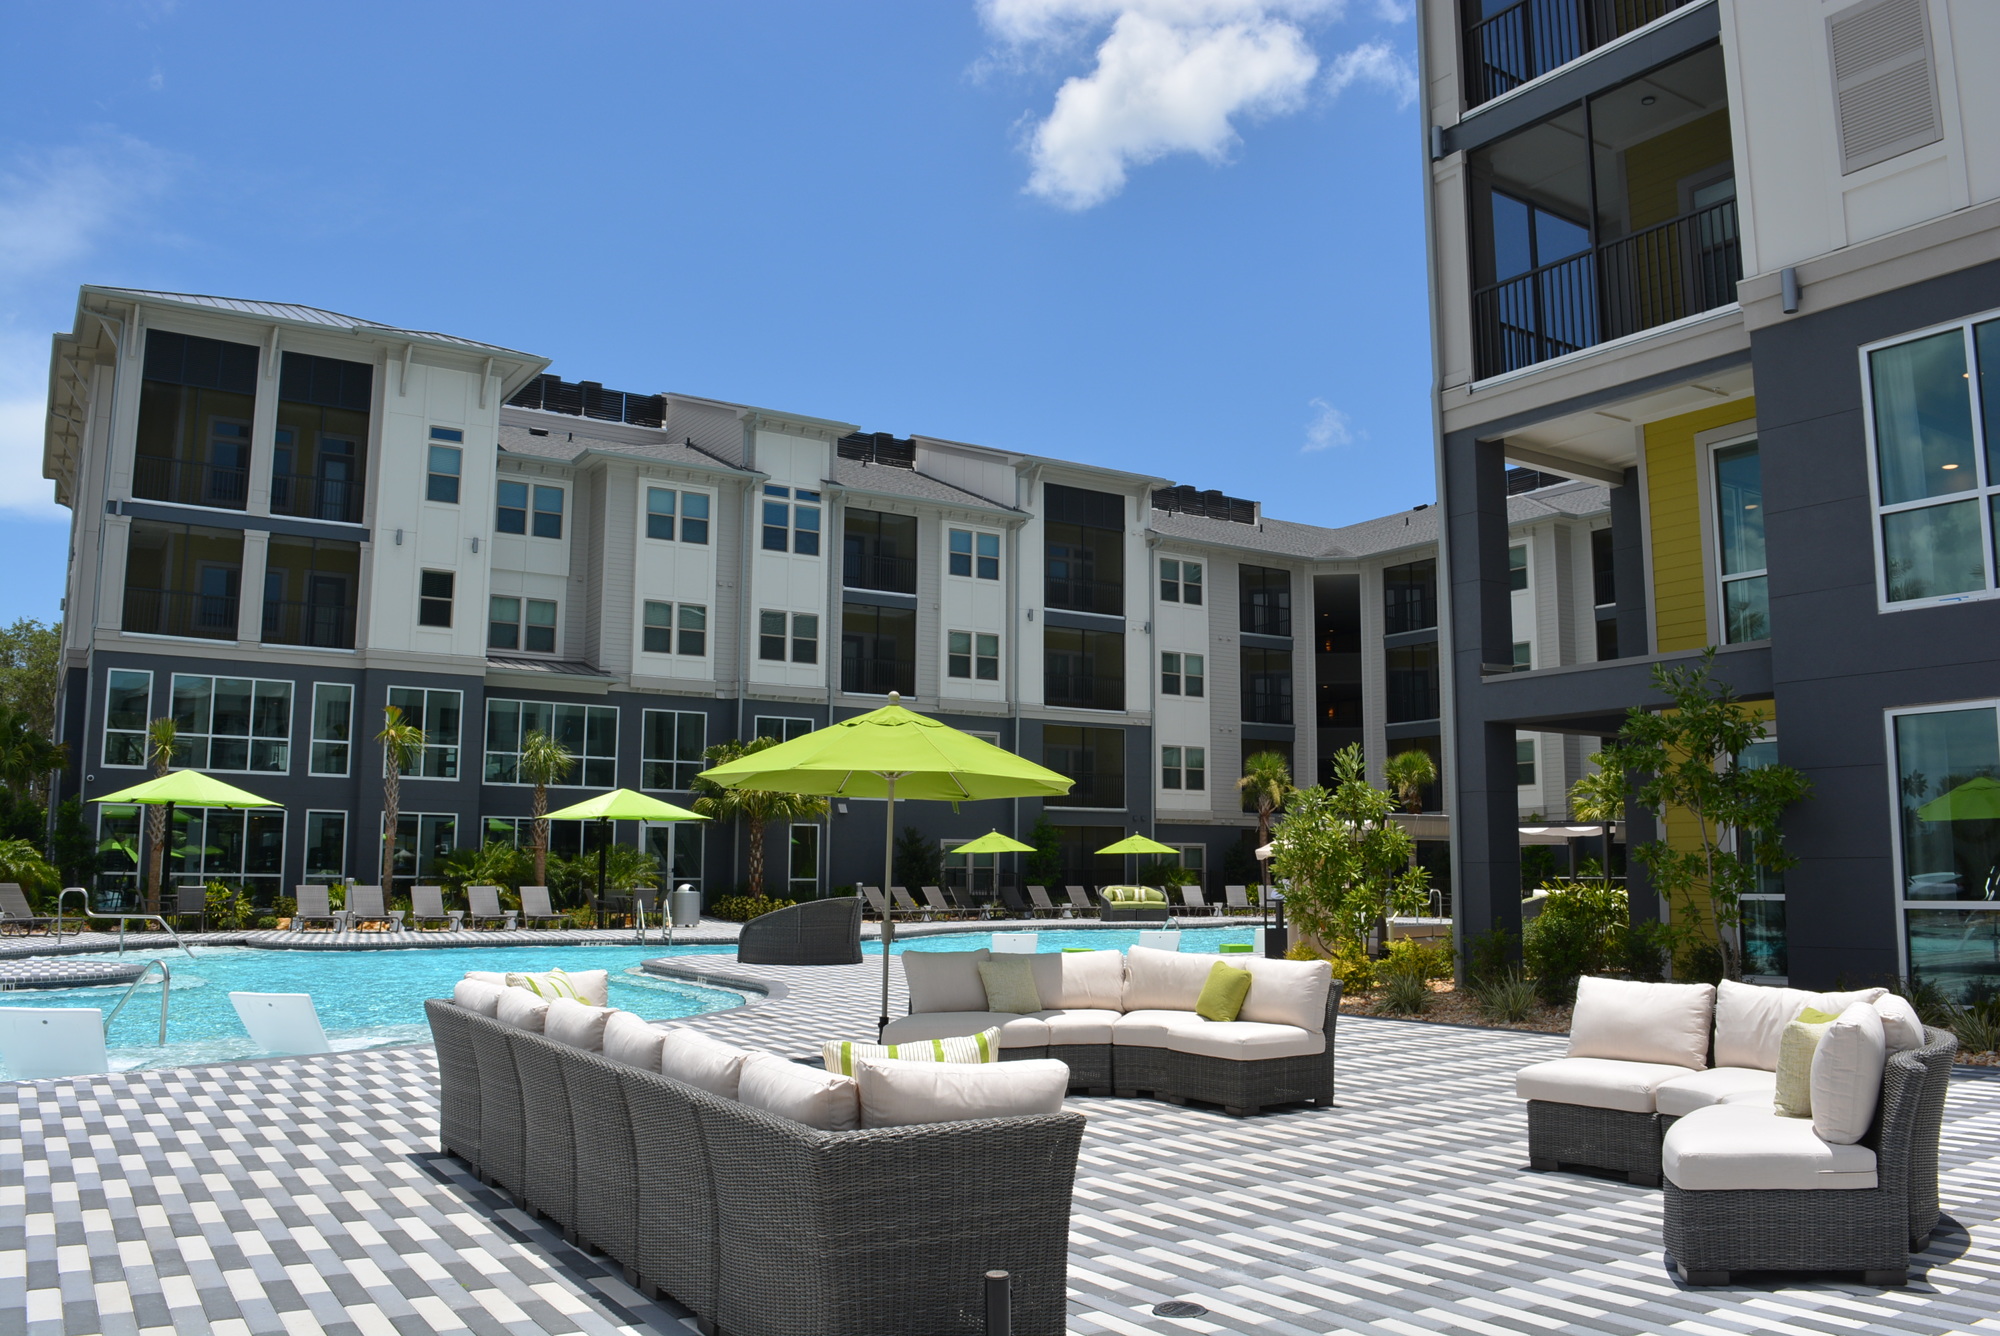 The resort-style pool connects has a view of the lake and connects to the community's clubhouse, where residents can gather to play pool, watch television or simply relax.